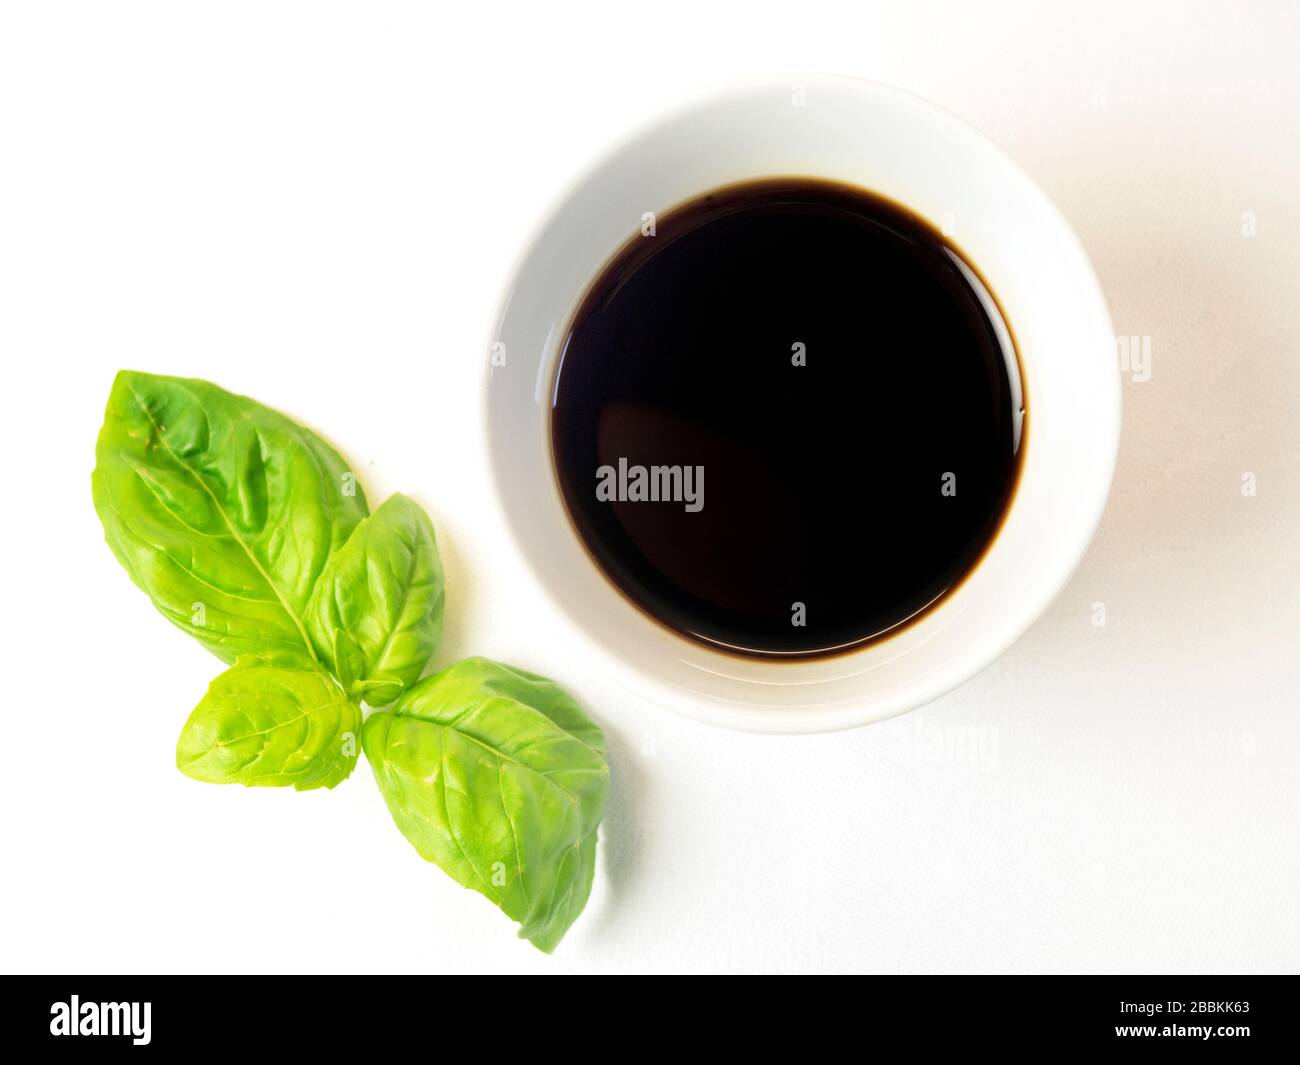 A small bowl of balsamic vinegar with a sprig of basil on a white tablecloth Stock Photo